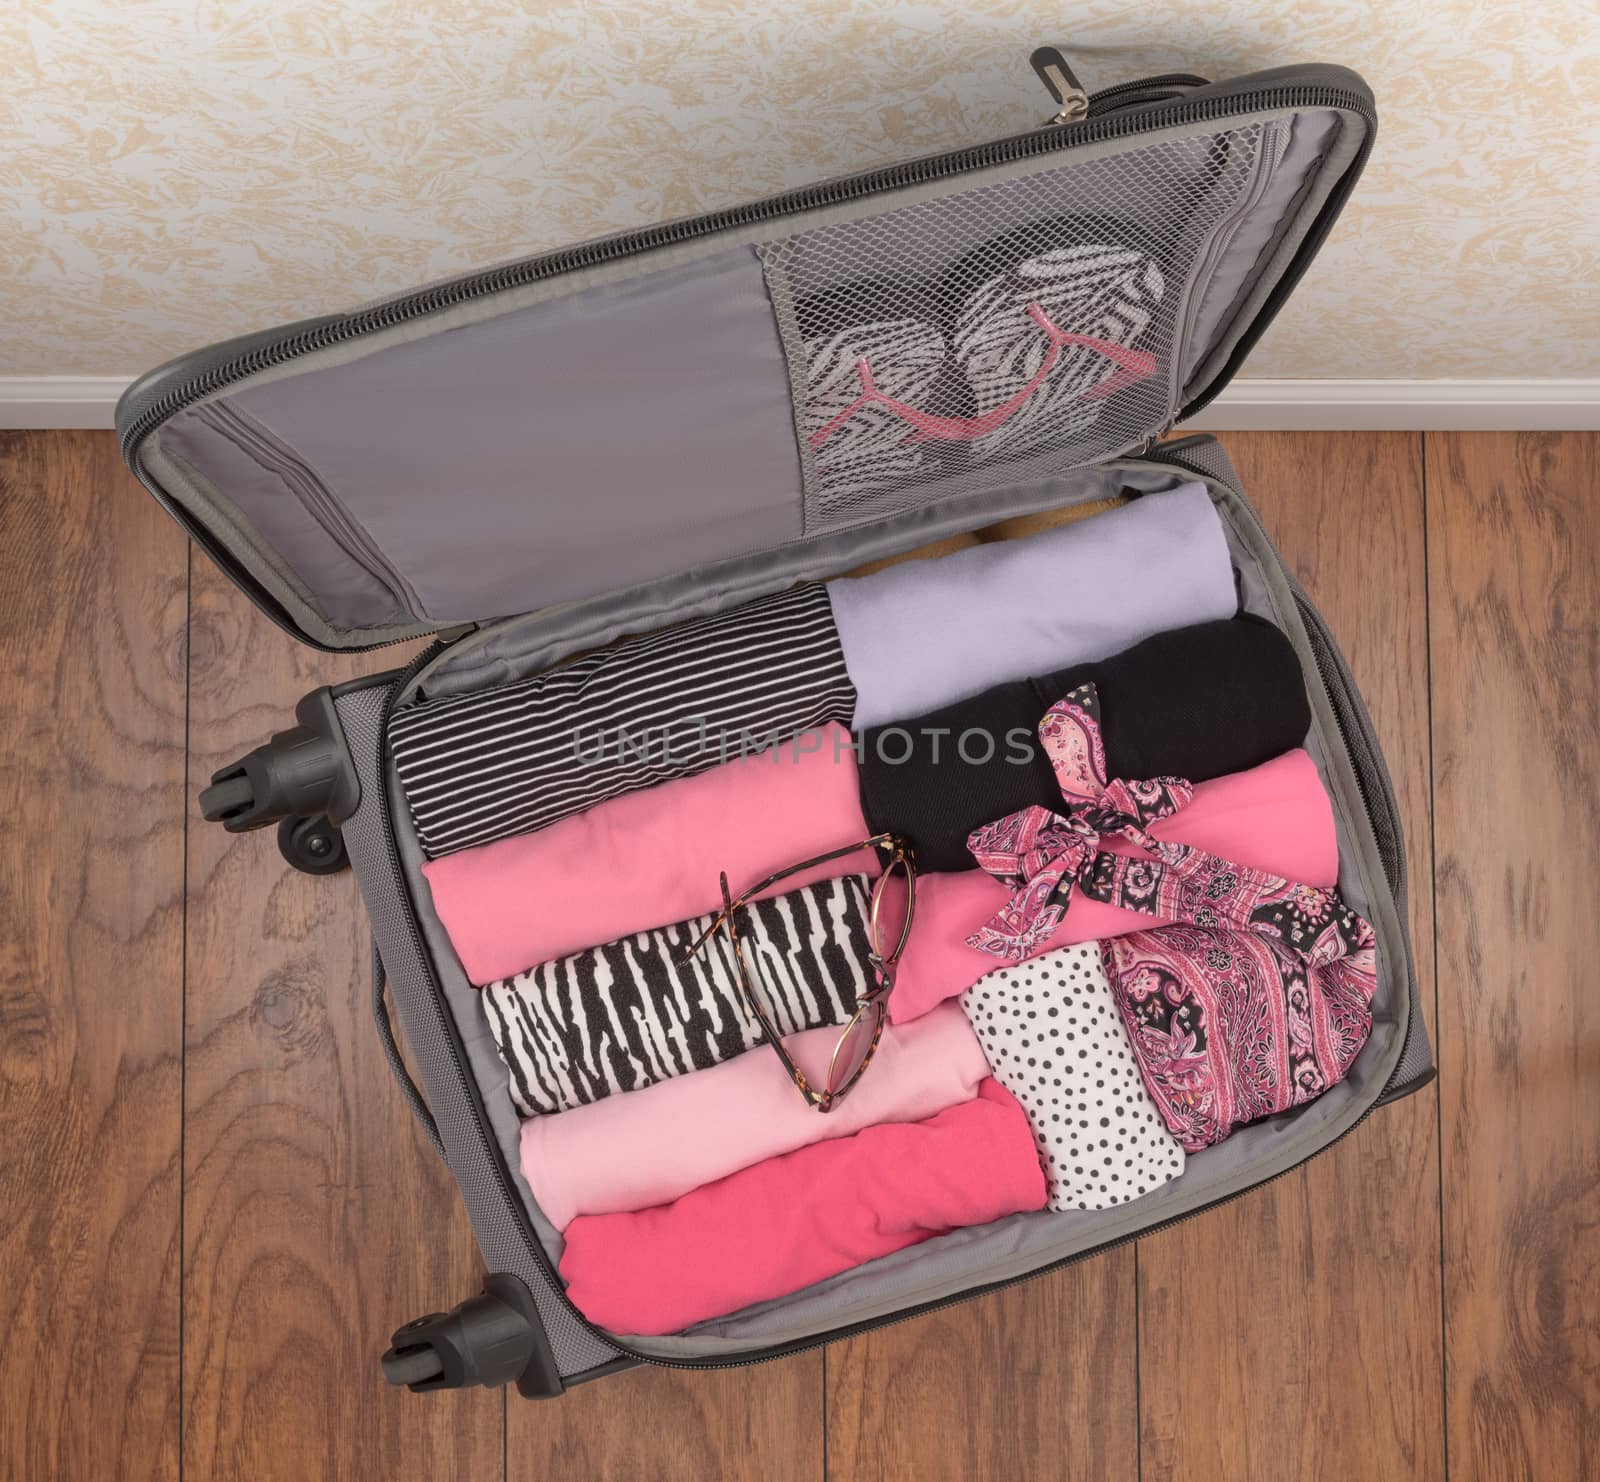 Ladies packed carry-on suitcase with rolled clothes